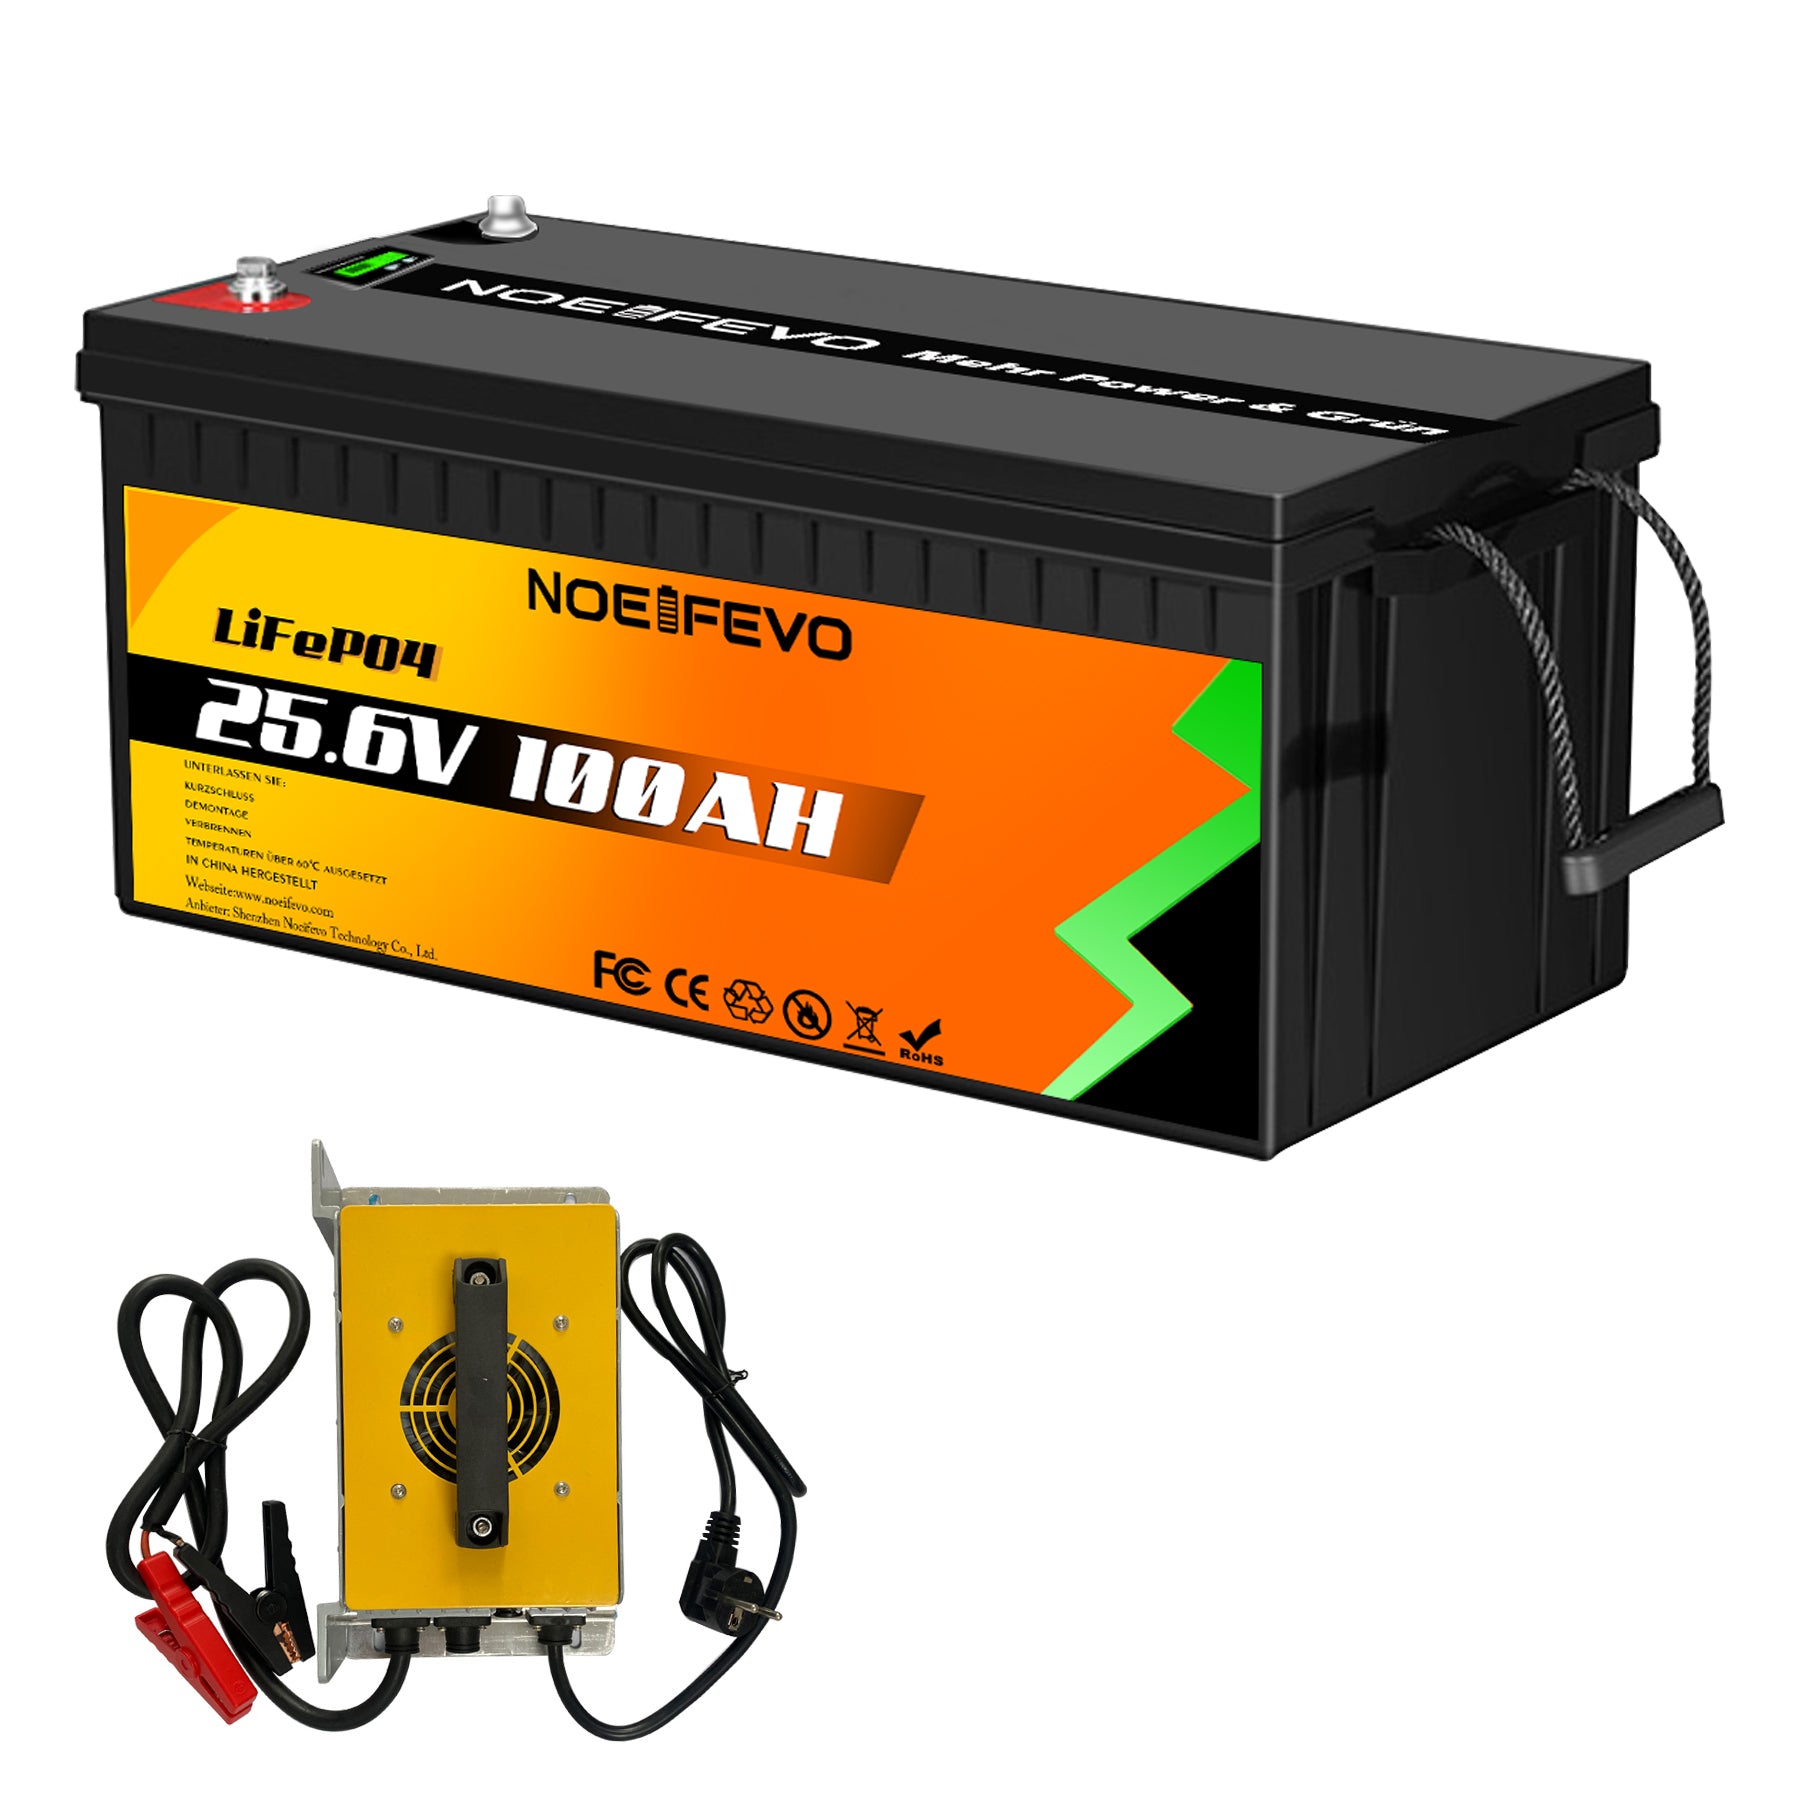 NOEIFEVO 25.6V 24V 100Ah LiFePO4 Lithium Battery with 50A Charger